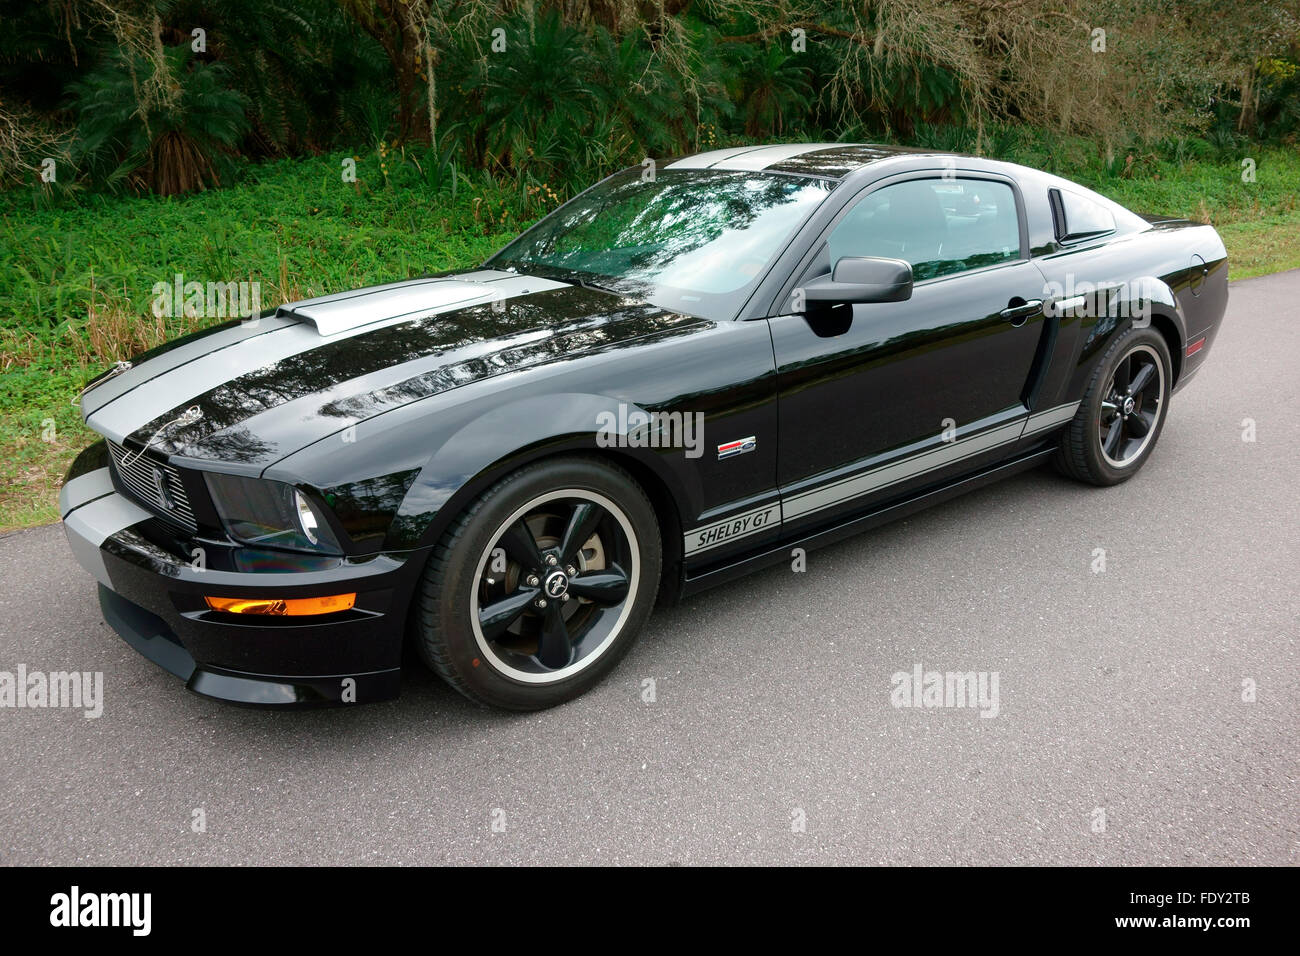 2007 black Shelby GT Mustang muscle car on a highway Stock Photo